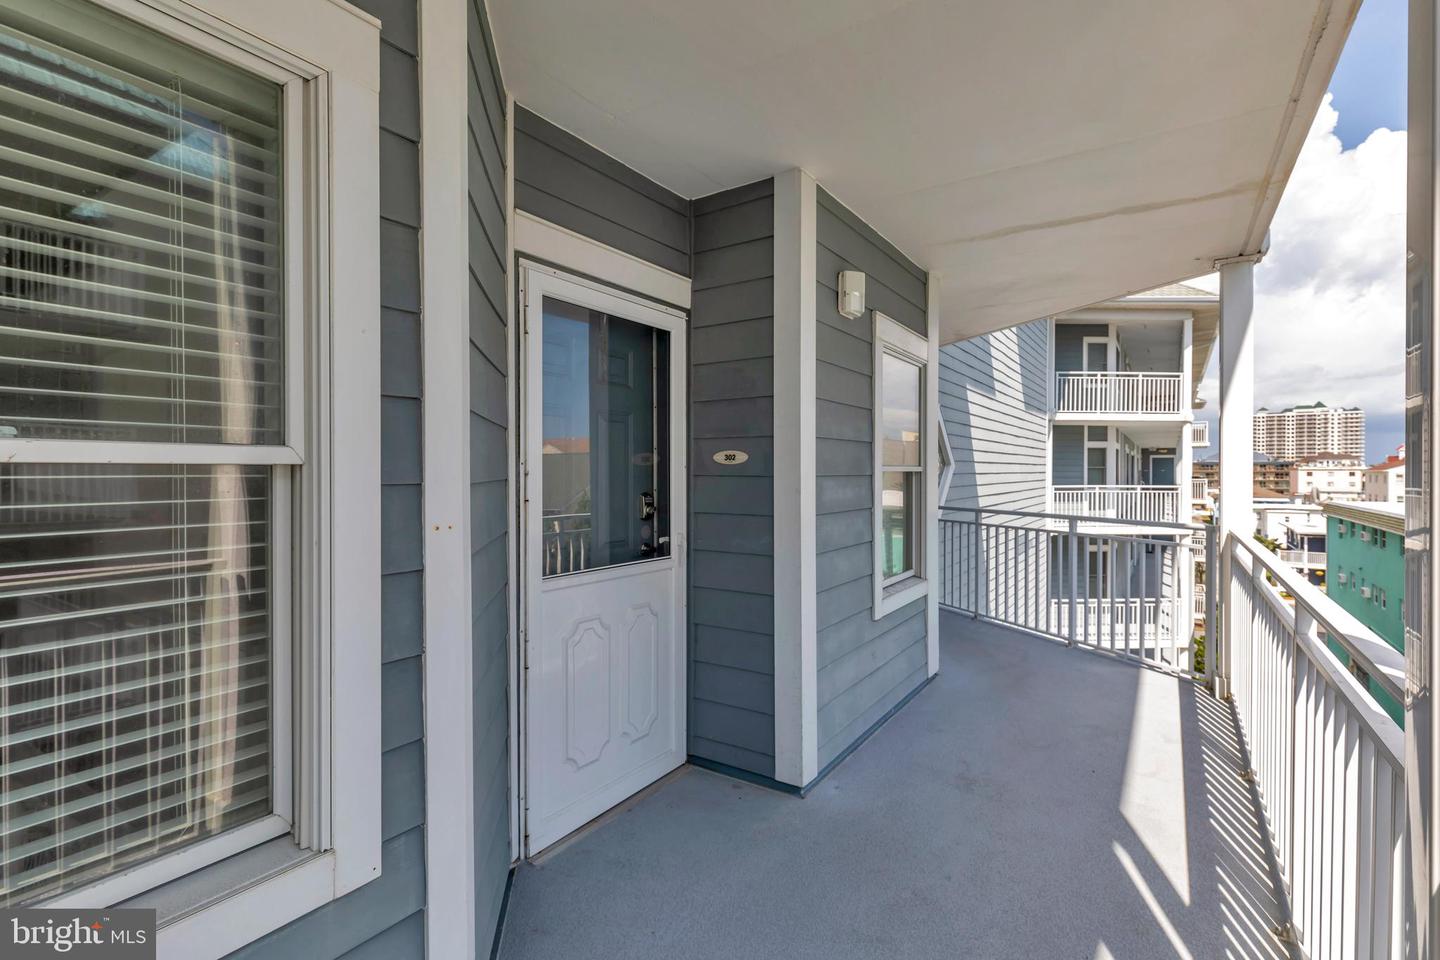 MDWO2015722-802606210510-2024-02-22-09-49-25 18 41st St #302 | Ocean City, MD Real Estate For Sale | MLS# Mdwo2015722  - 1st Choice Properties